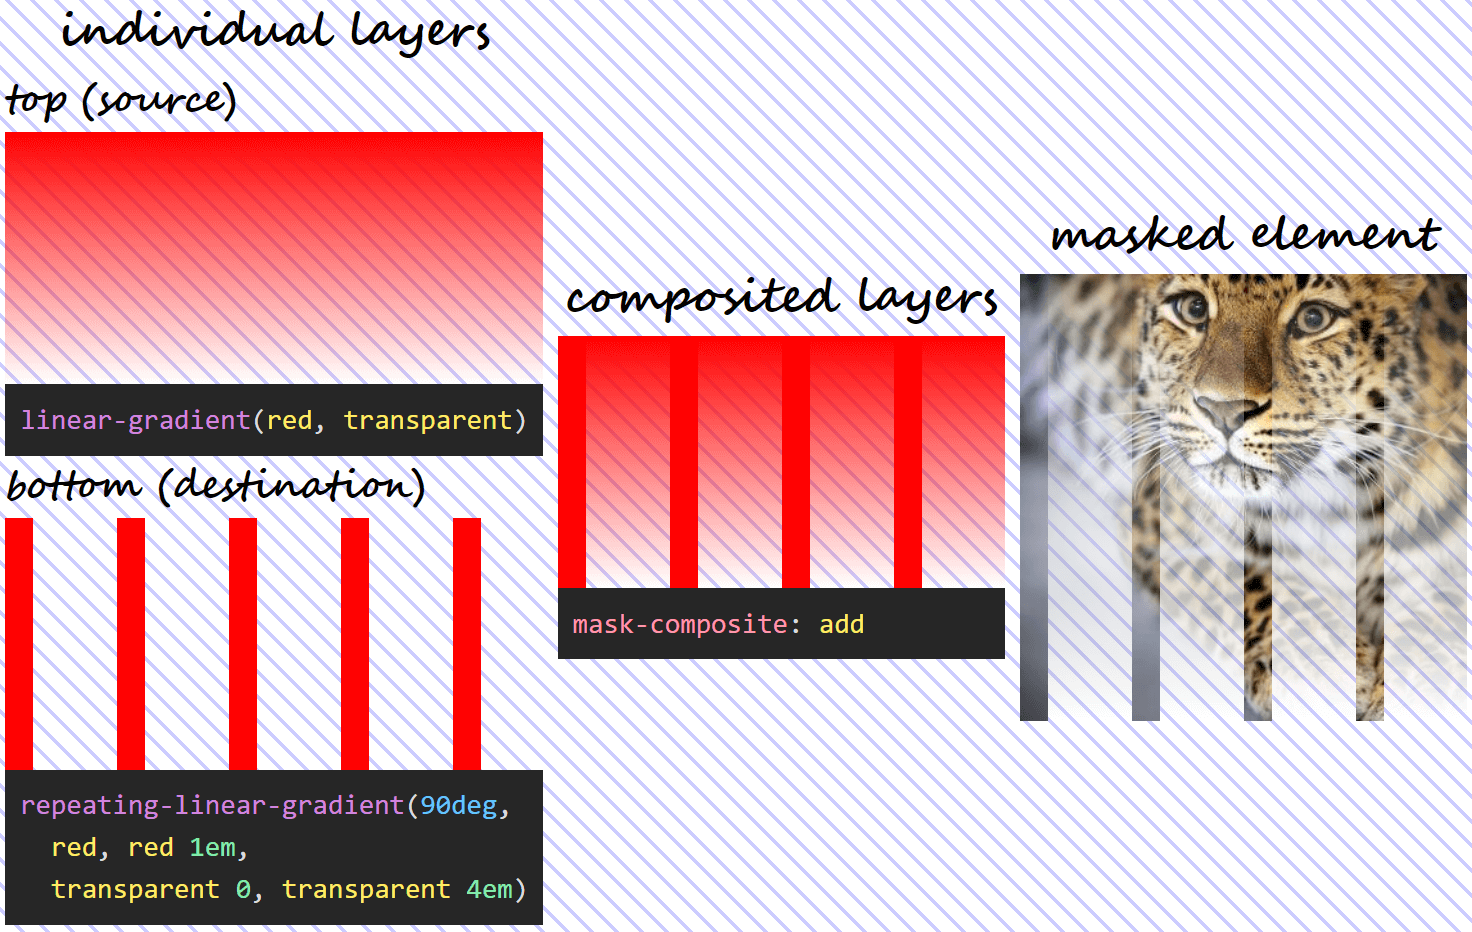 Three column illustration of mask-composite: add in action. On the first column, we have the individual gradient layers (both the visual results and the generating code). On the second column, we can see what the layer resulting as a result of compositing using the add operation looks like. And on the third column, we see this resulting mask layer applied on an image of an Amur leopard. Wherever either layer is fully opaque, our image is fully opaque (not masked out at all). Wherever both layers are fully transparent, our image is fully transparent (completely masked out) as well.